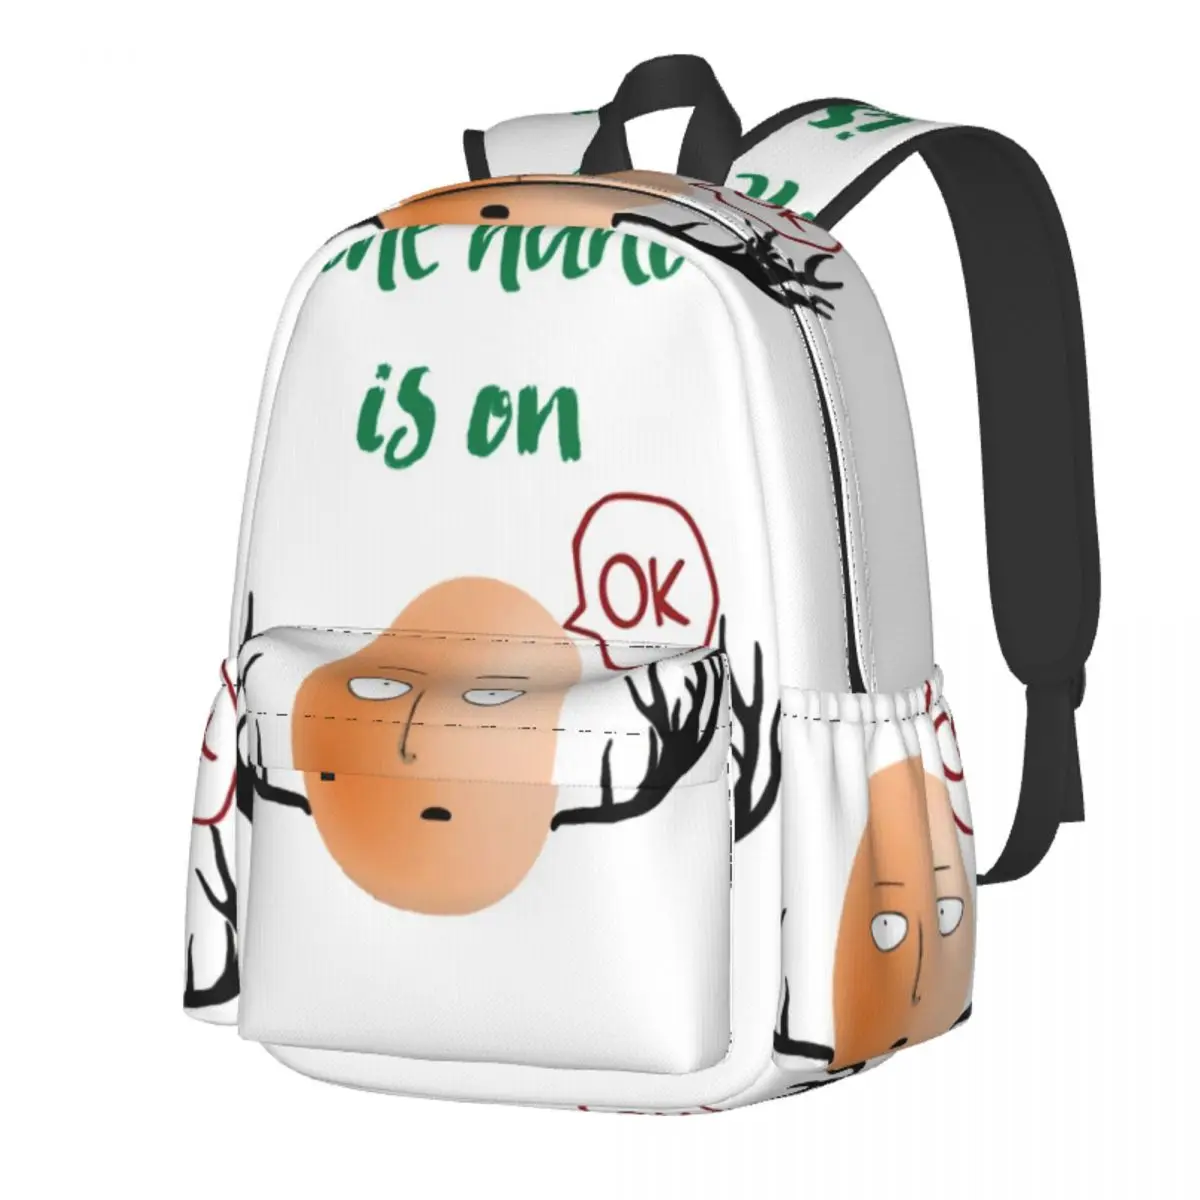 

Easter Egg Hunt Is On Backpack One Punch Man University Backpacks Student Unisex Pretty School Bags High Quality Soft Rucksack